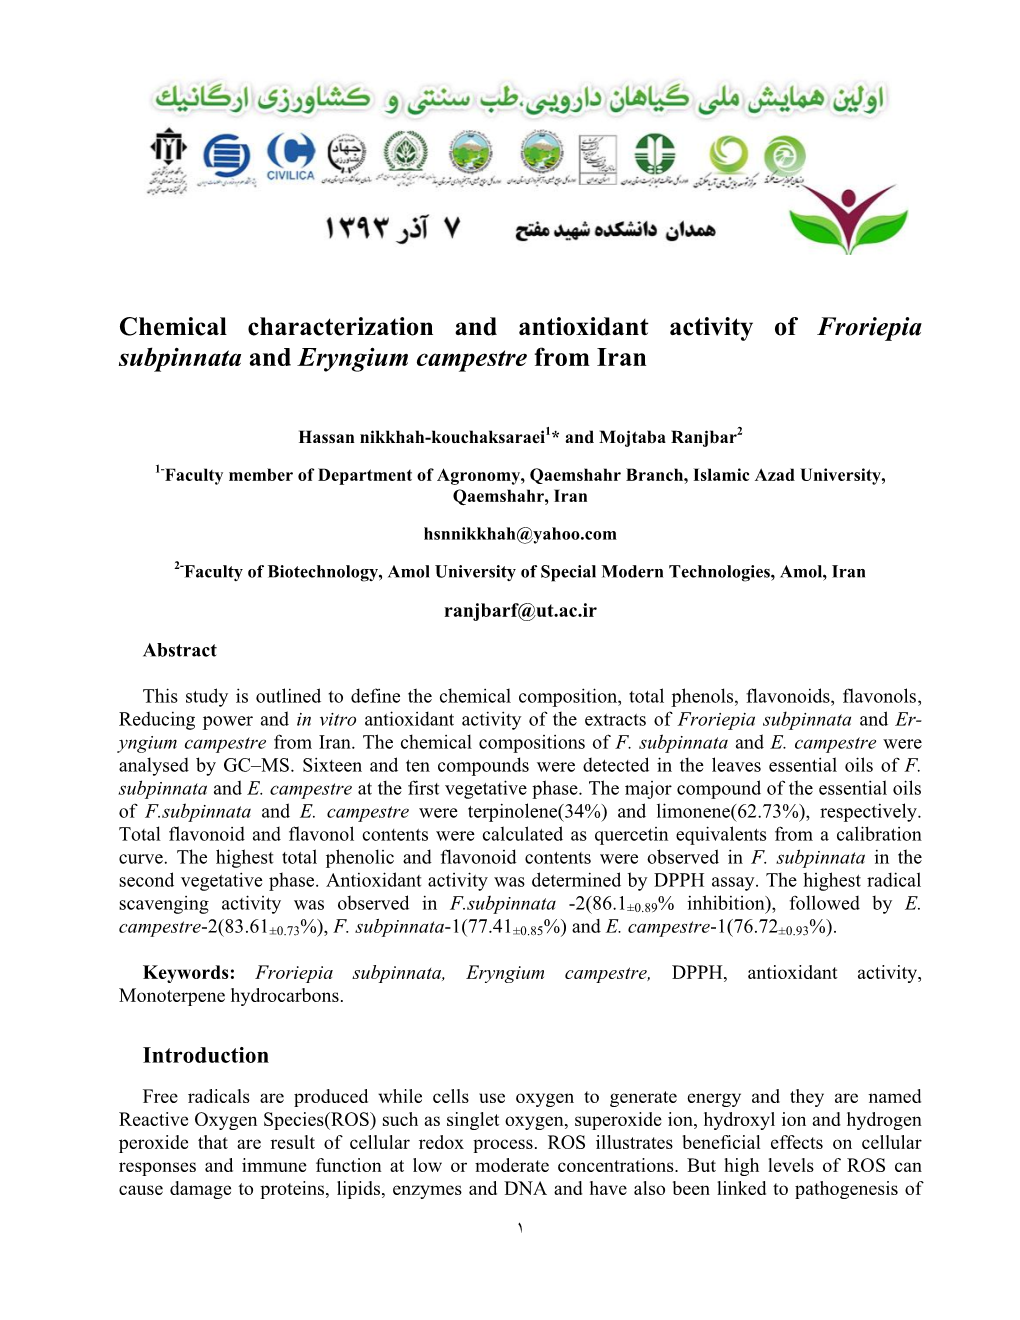 Chemical Characterization and Antioxidant Activity of Froriepia Subpinnata and Eryngium Campestre from Iran